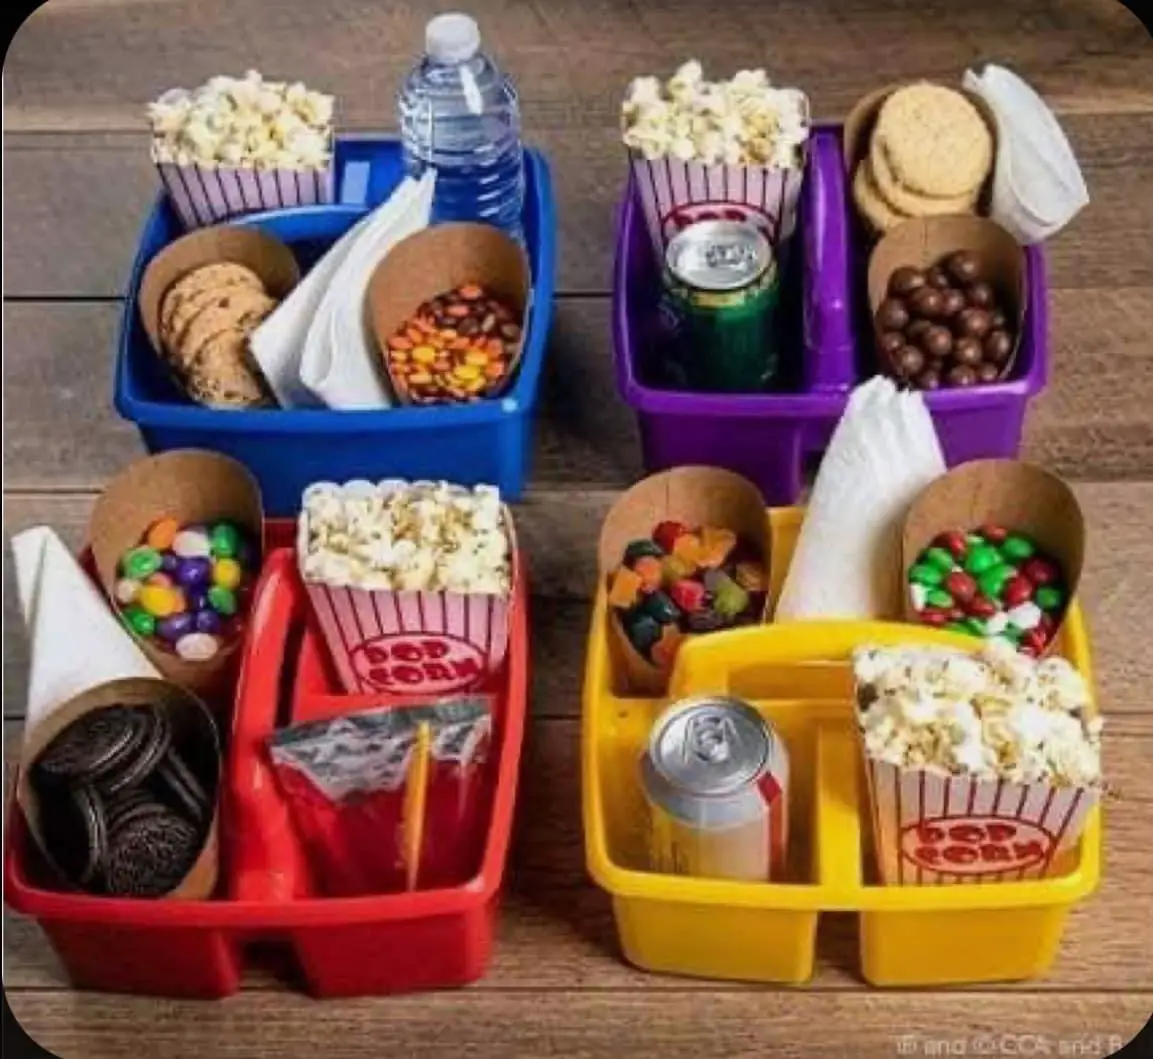 Let's pack a snackle box to go to the movies! 🍿❤️ This container is t